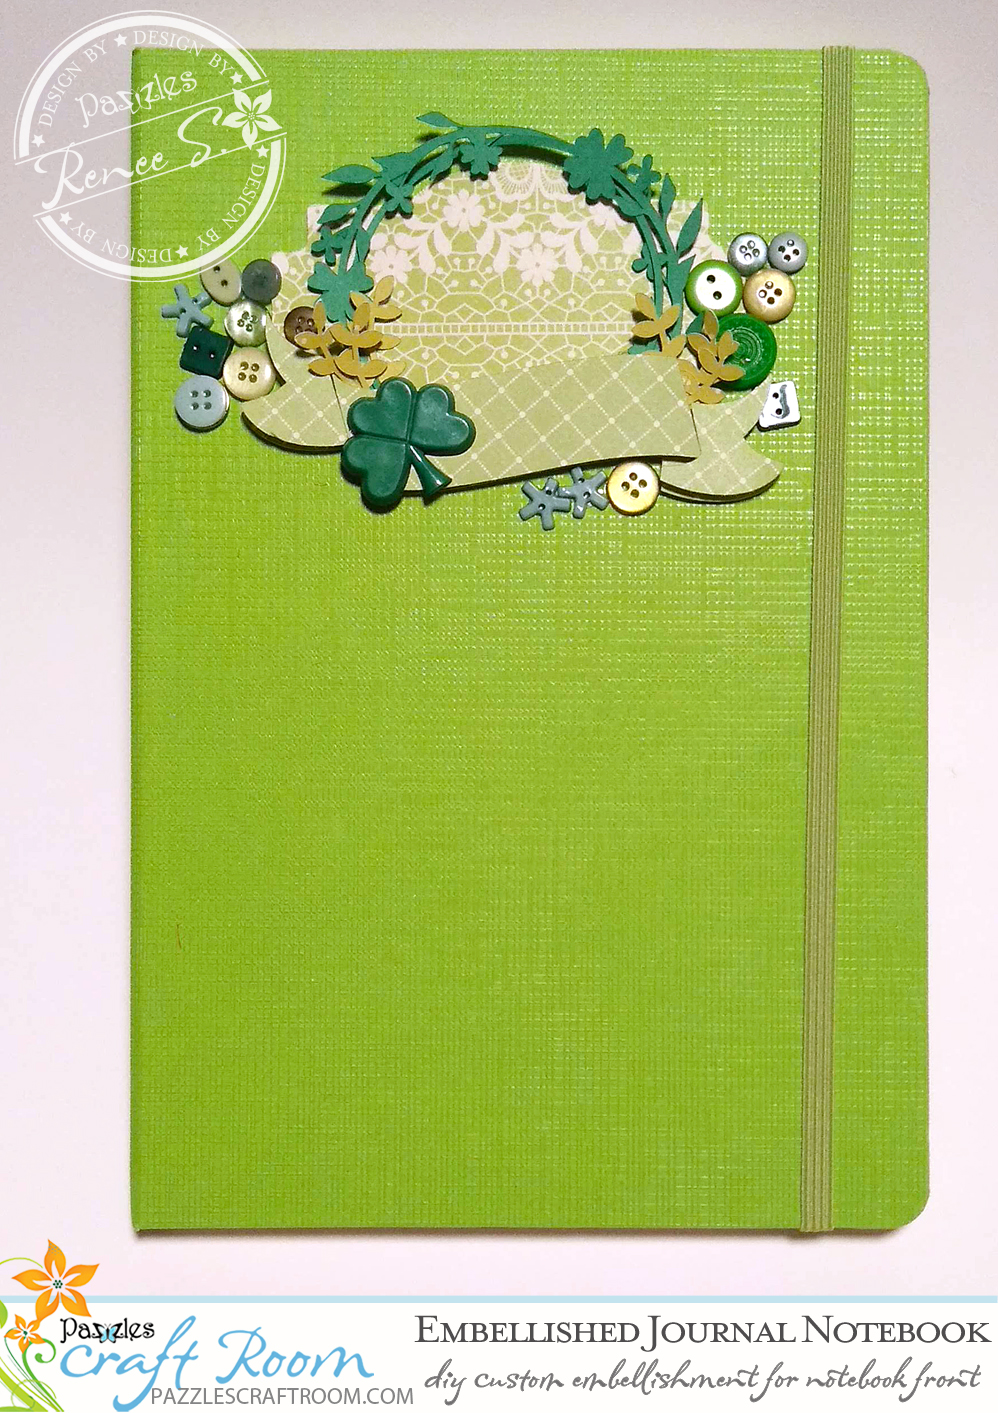 Pazzles DIY Embellished Notebook Cover with instant SVG download. Perfect for St. Patrick's Day. Compatible with all major electronic cutters including Pazzles Inspiration, Cricut, and Silhouette Cameo. Design by Renee Smart. 